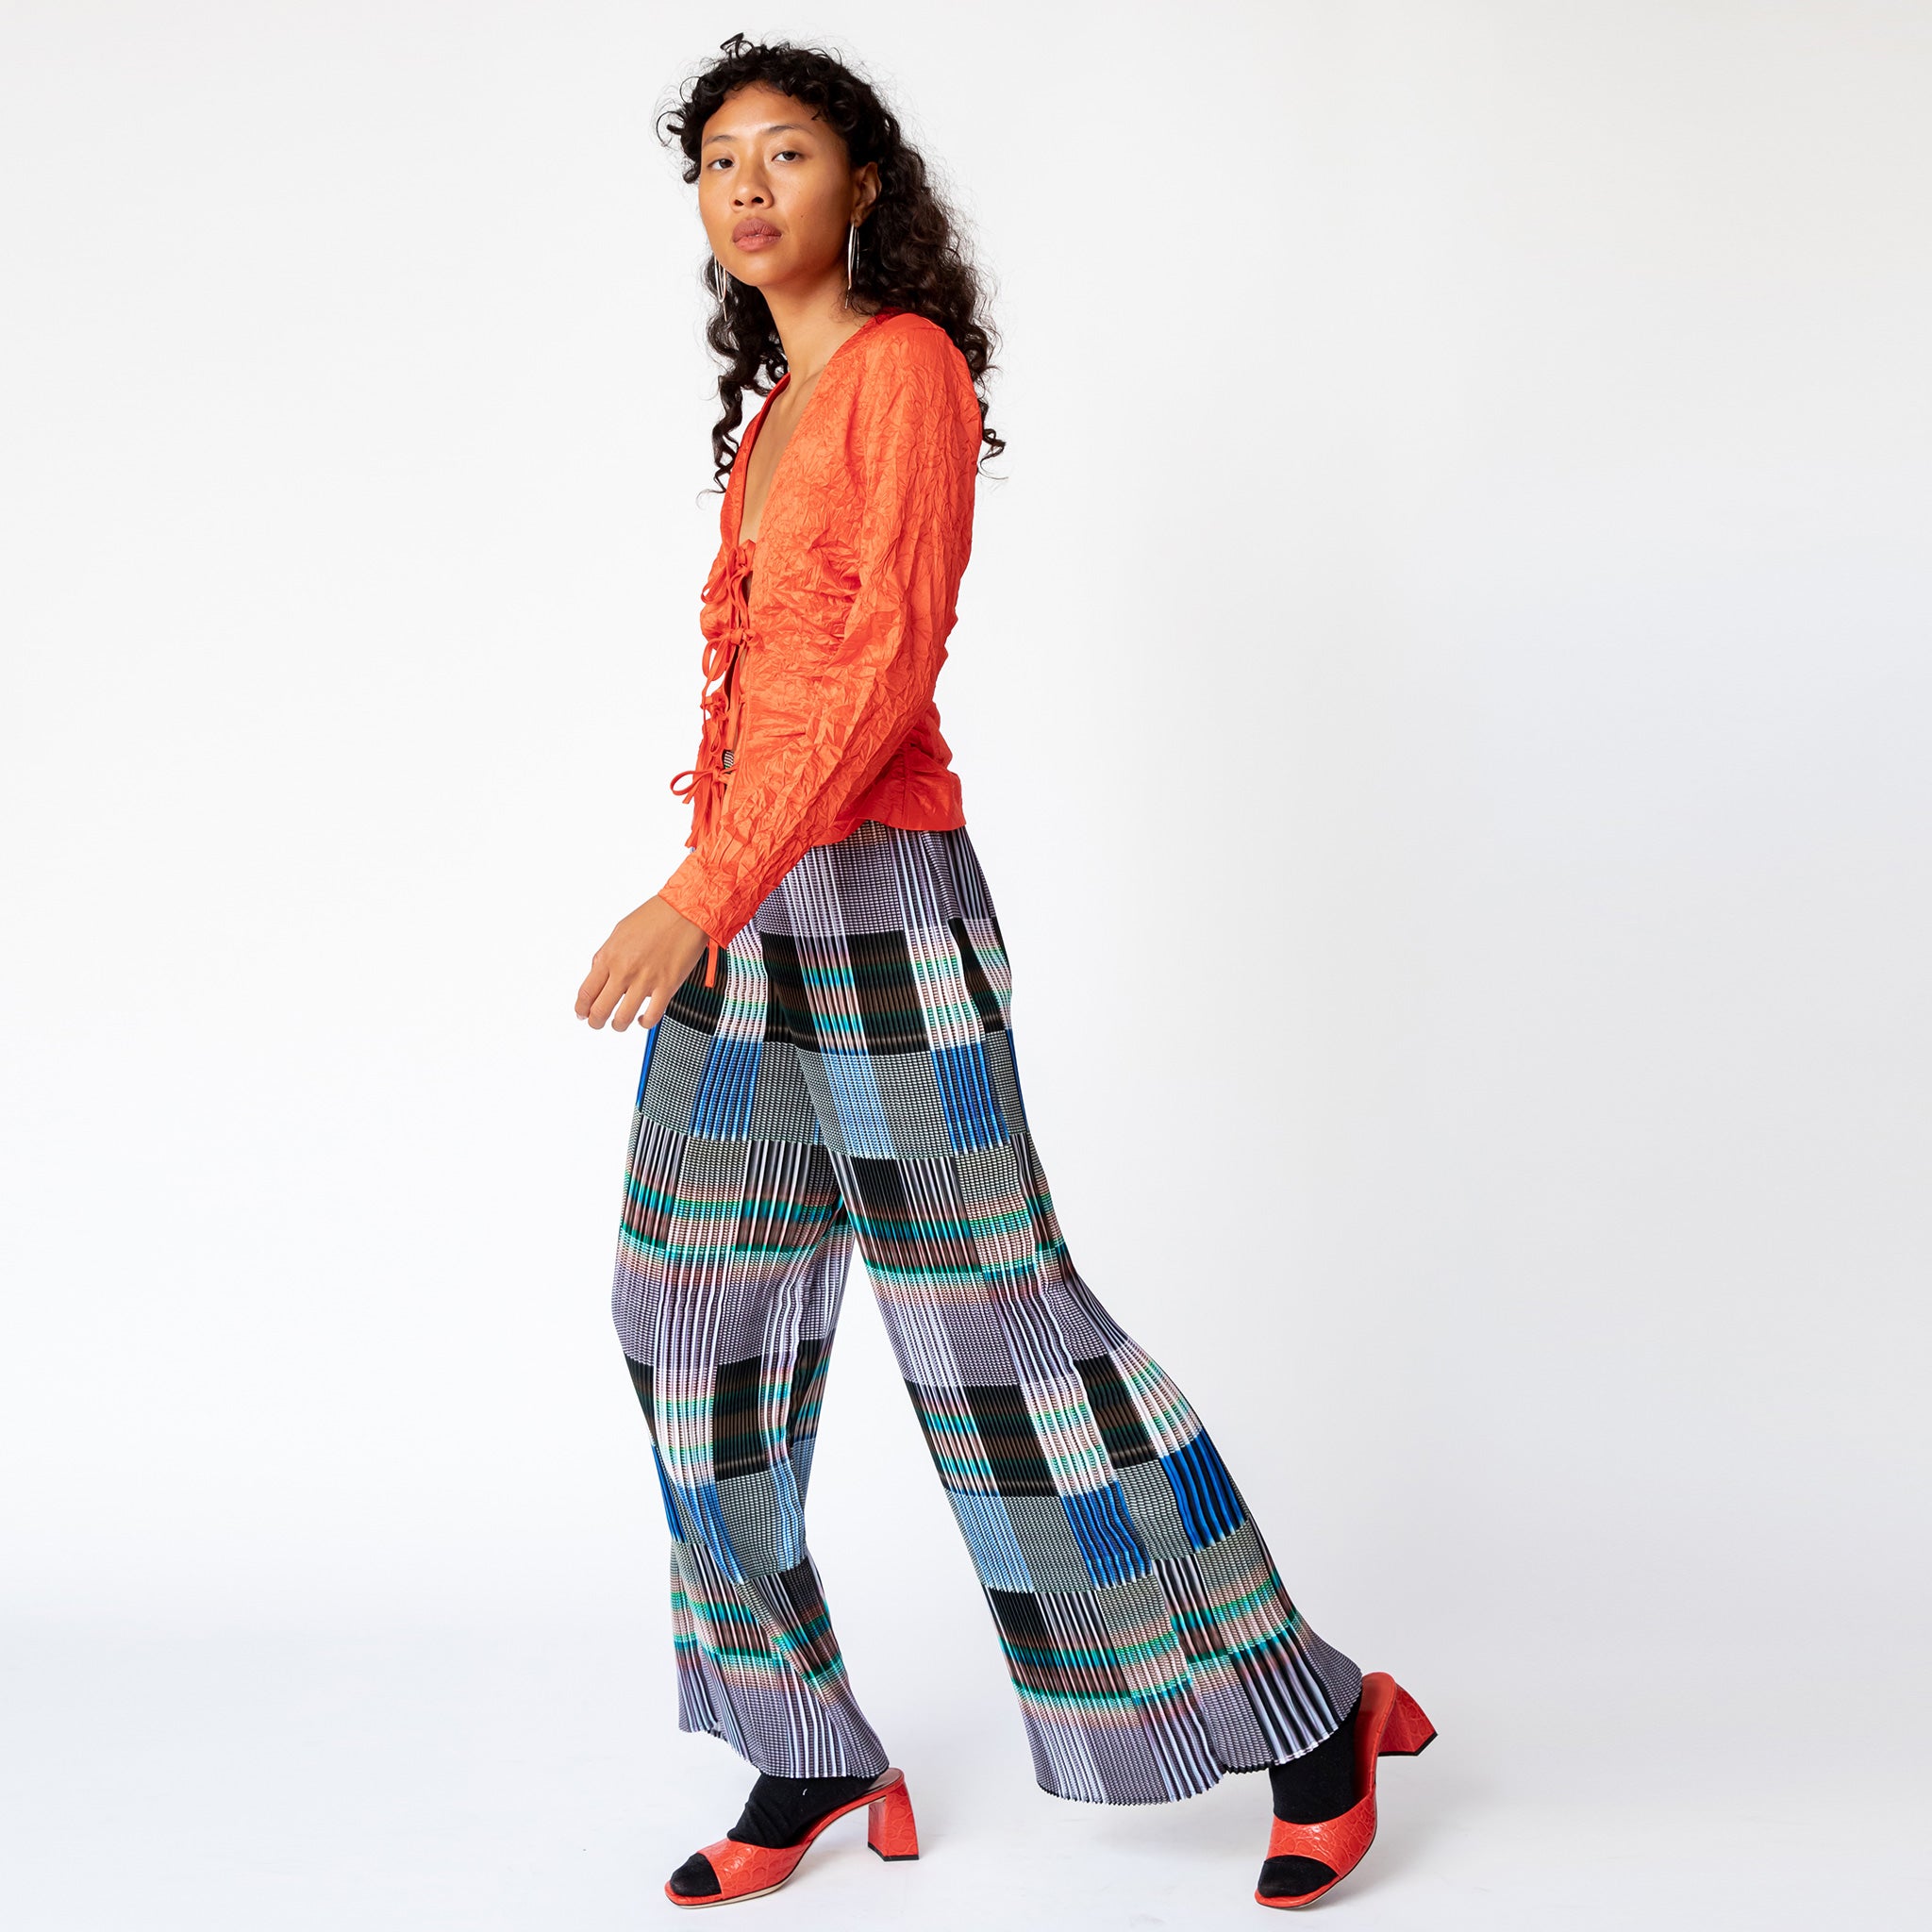 A model walks sideways while wearing the Julie Heuer pleated Jack Trousers in a gridded print pattern and a vibrant red blouse.